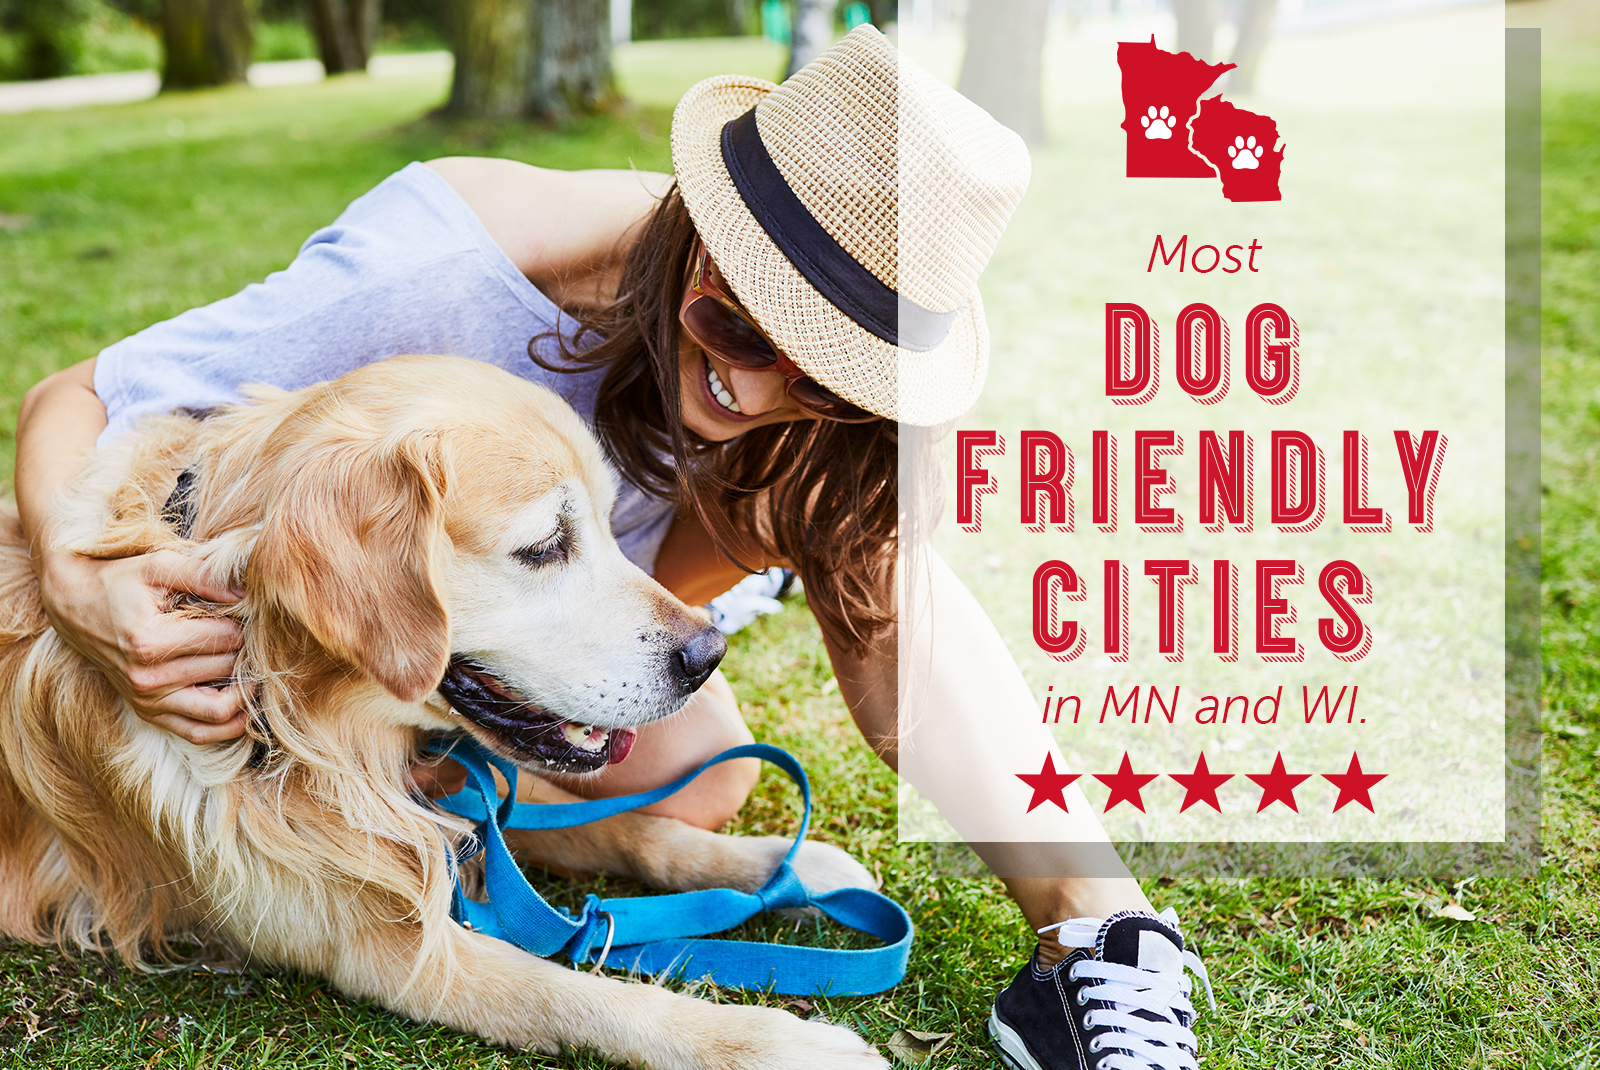 Most dog-friendly cities in Minnesota and Wisconsin | Edina Realty